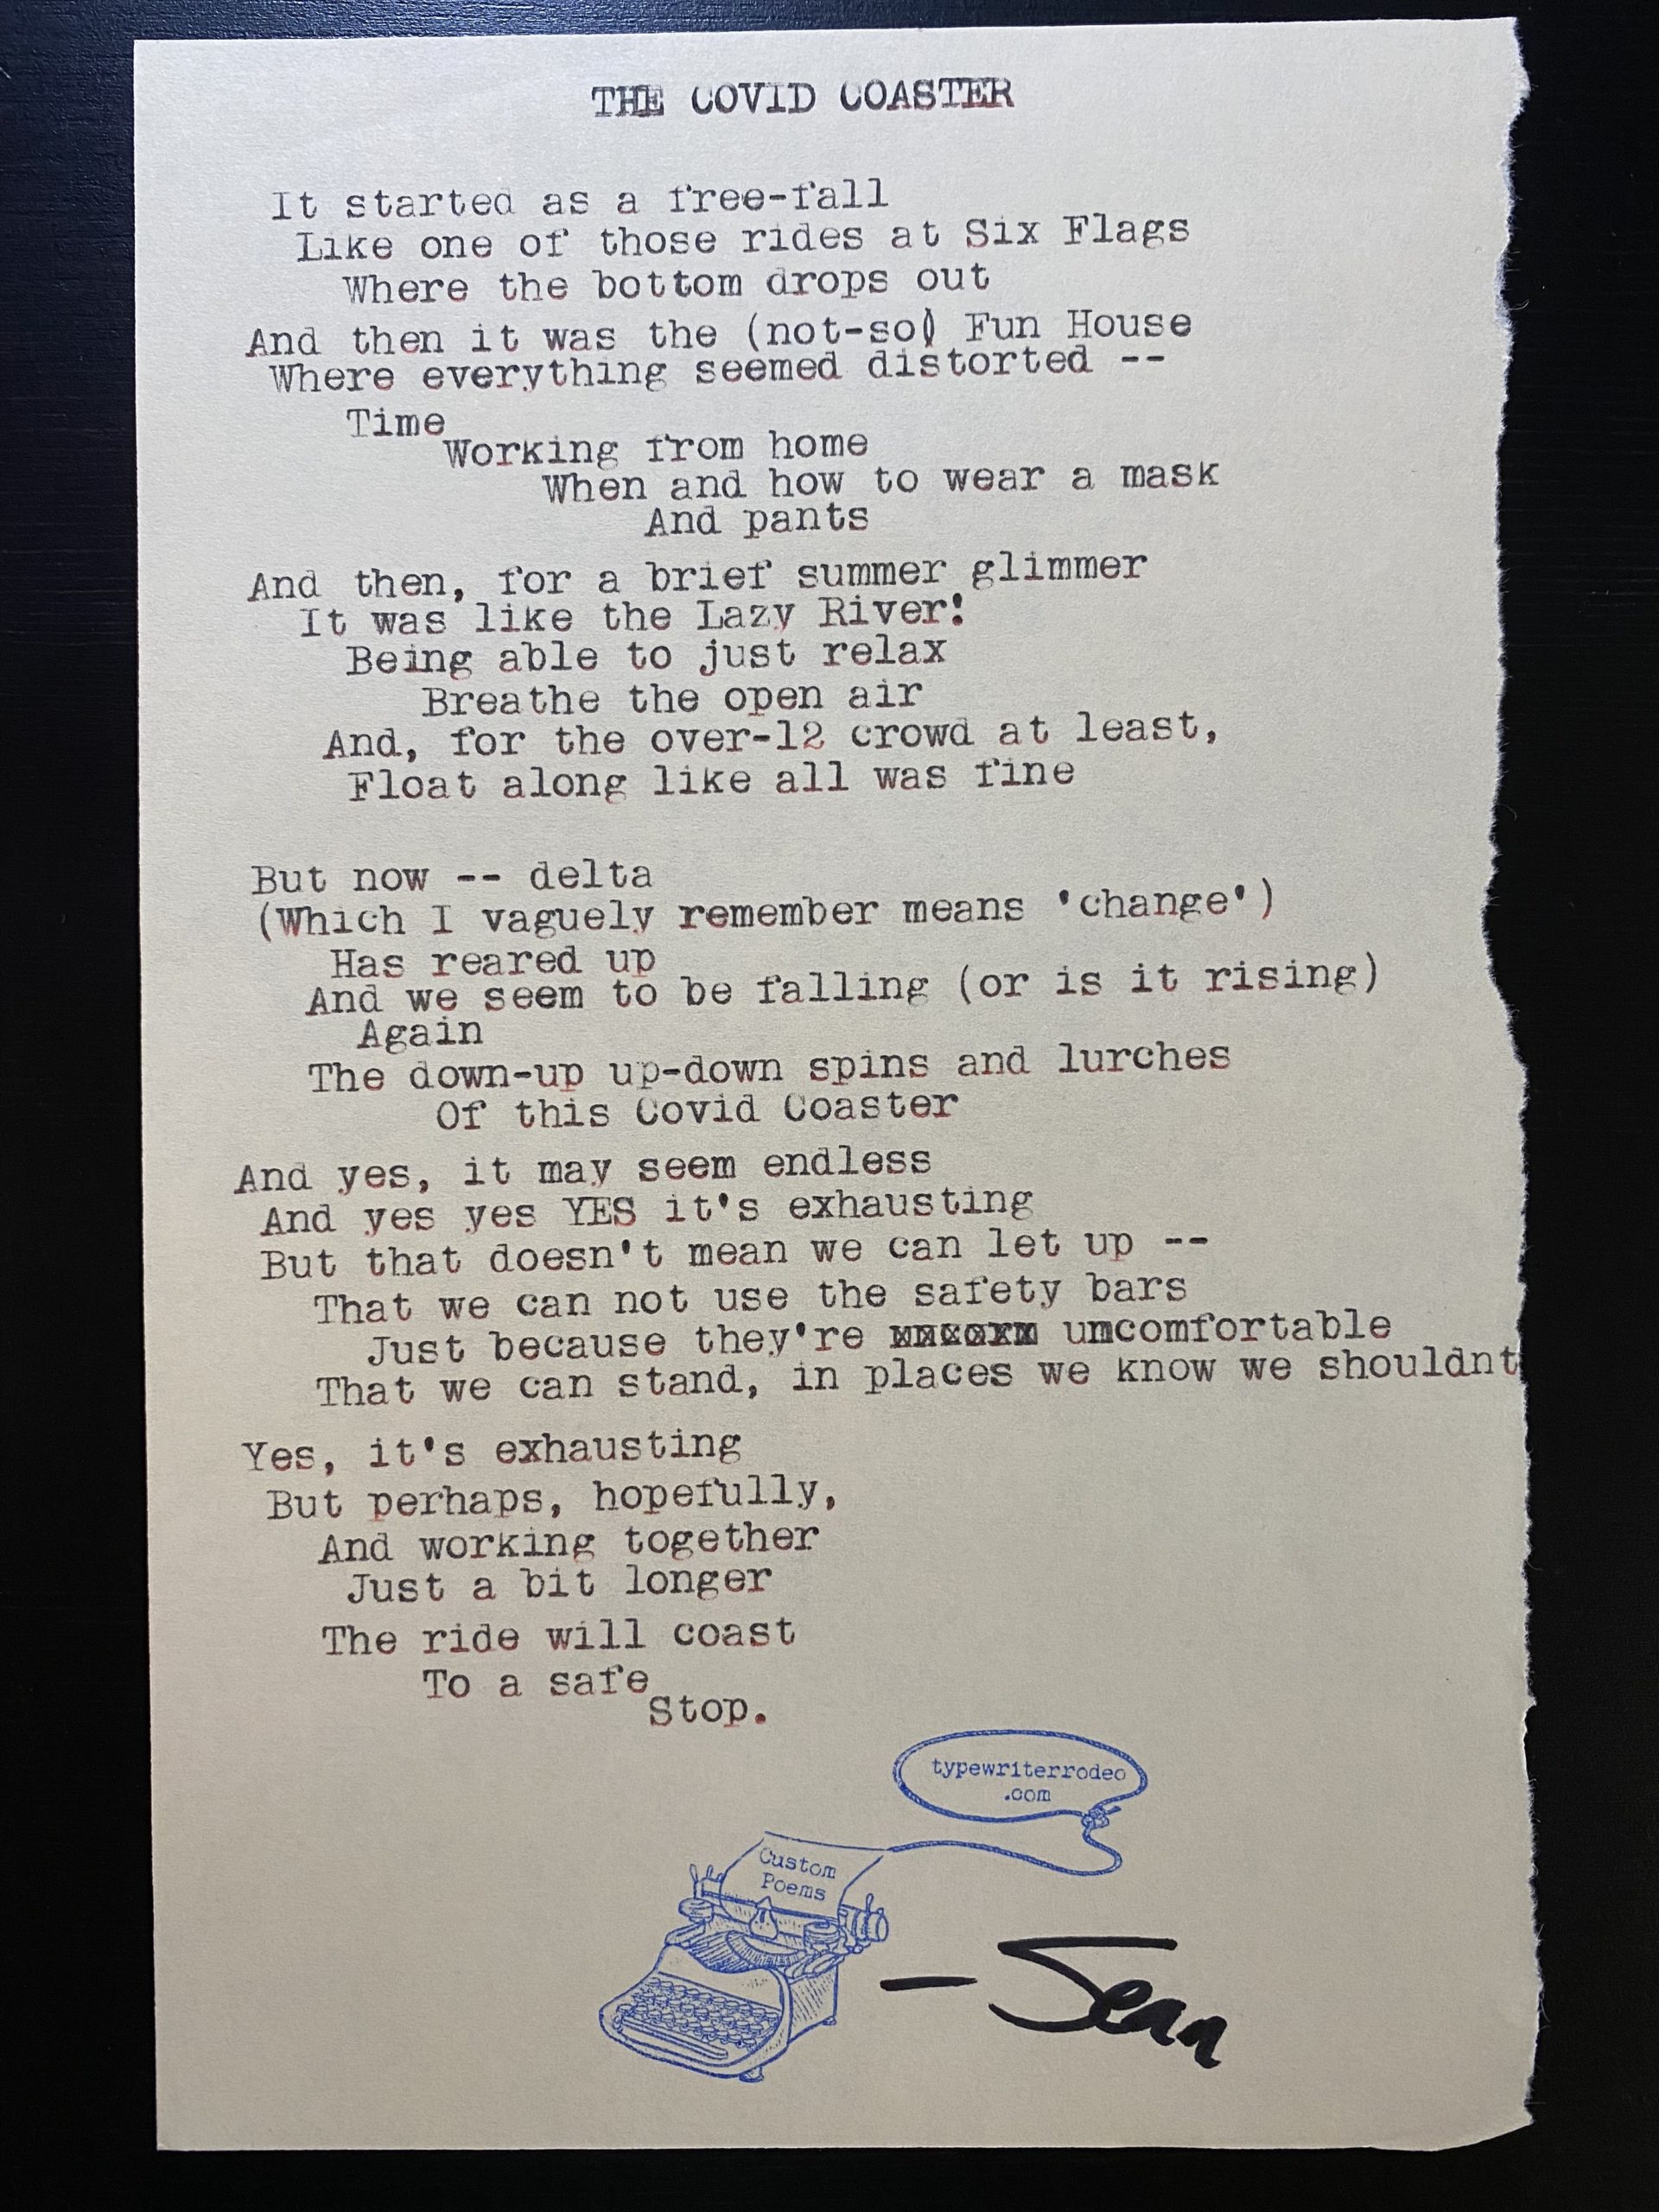 a photo of the typewritten poem on a torn piece of paper